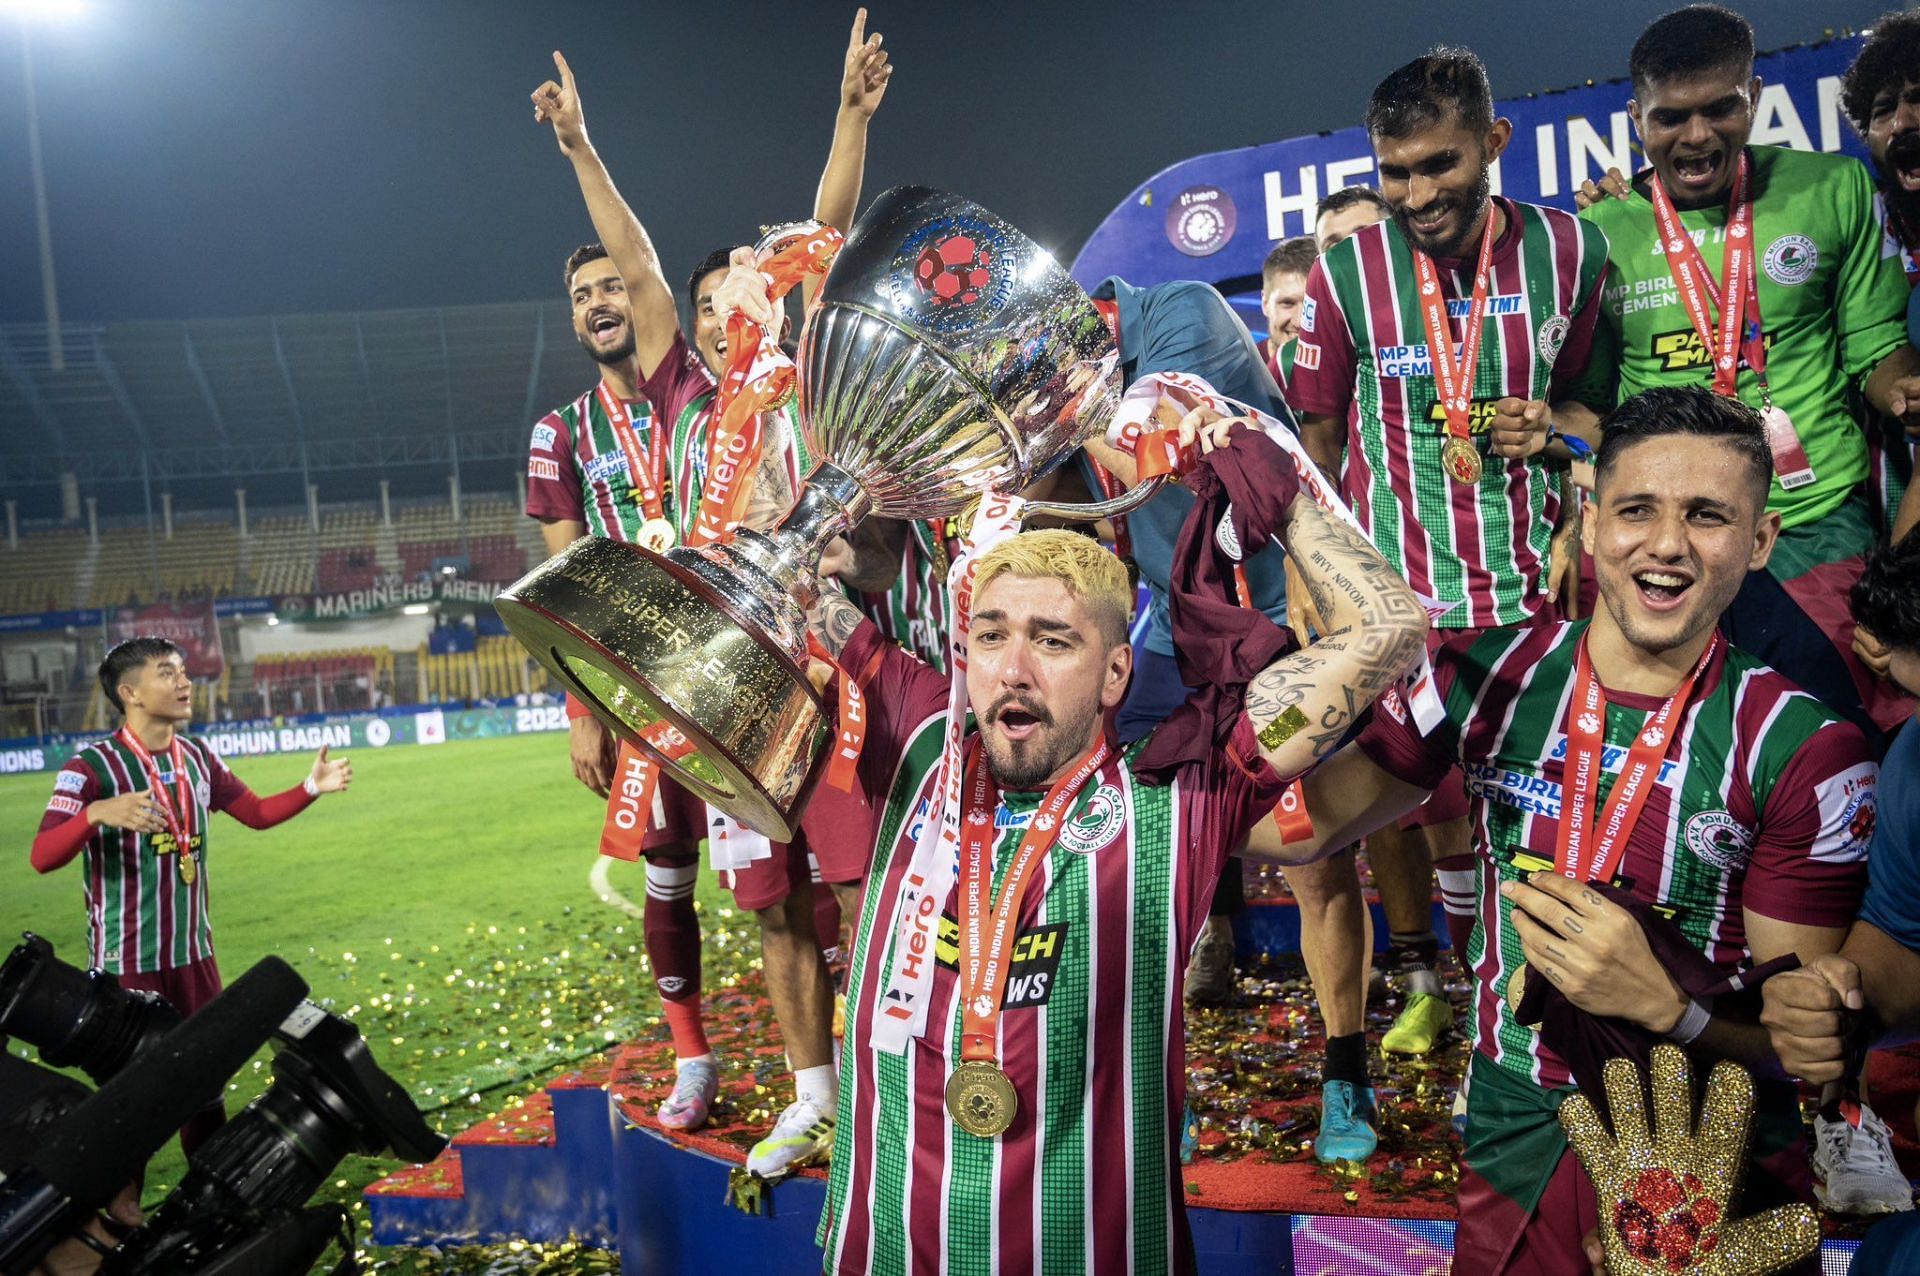 ATK Mohun Bagan won the ISL 2022-23 title after an enticing battle with Bengaluru FC.